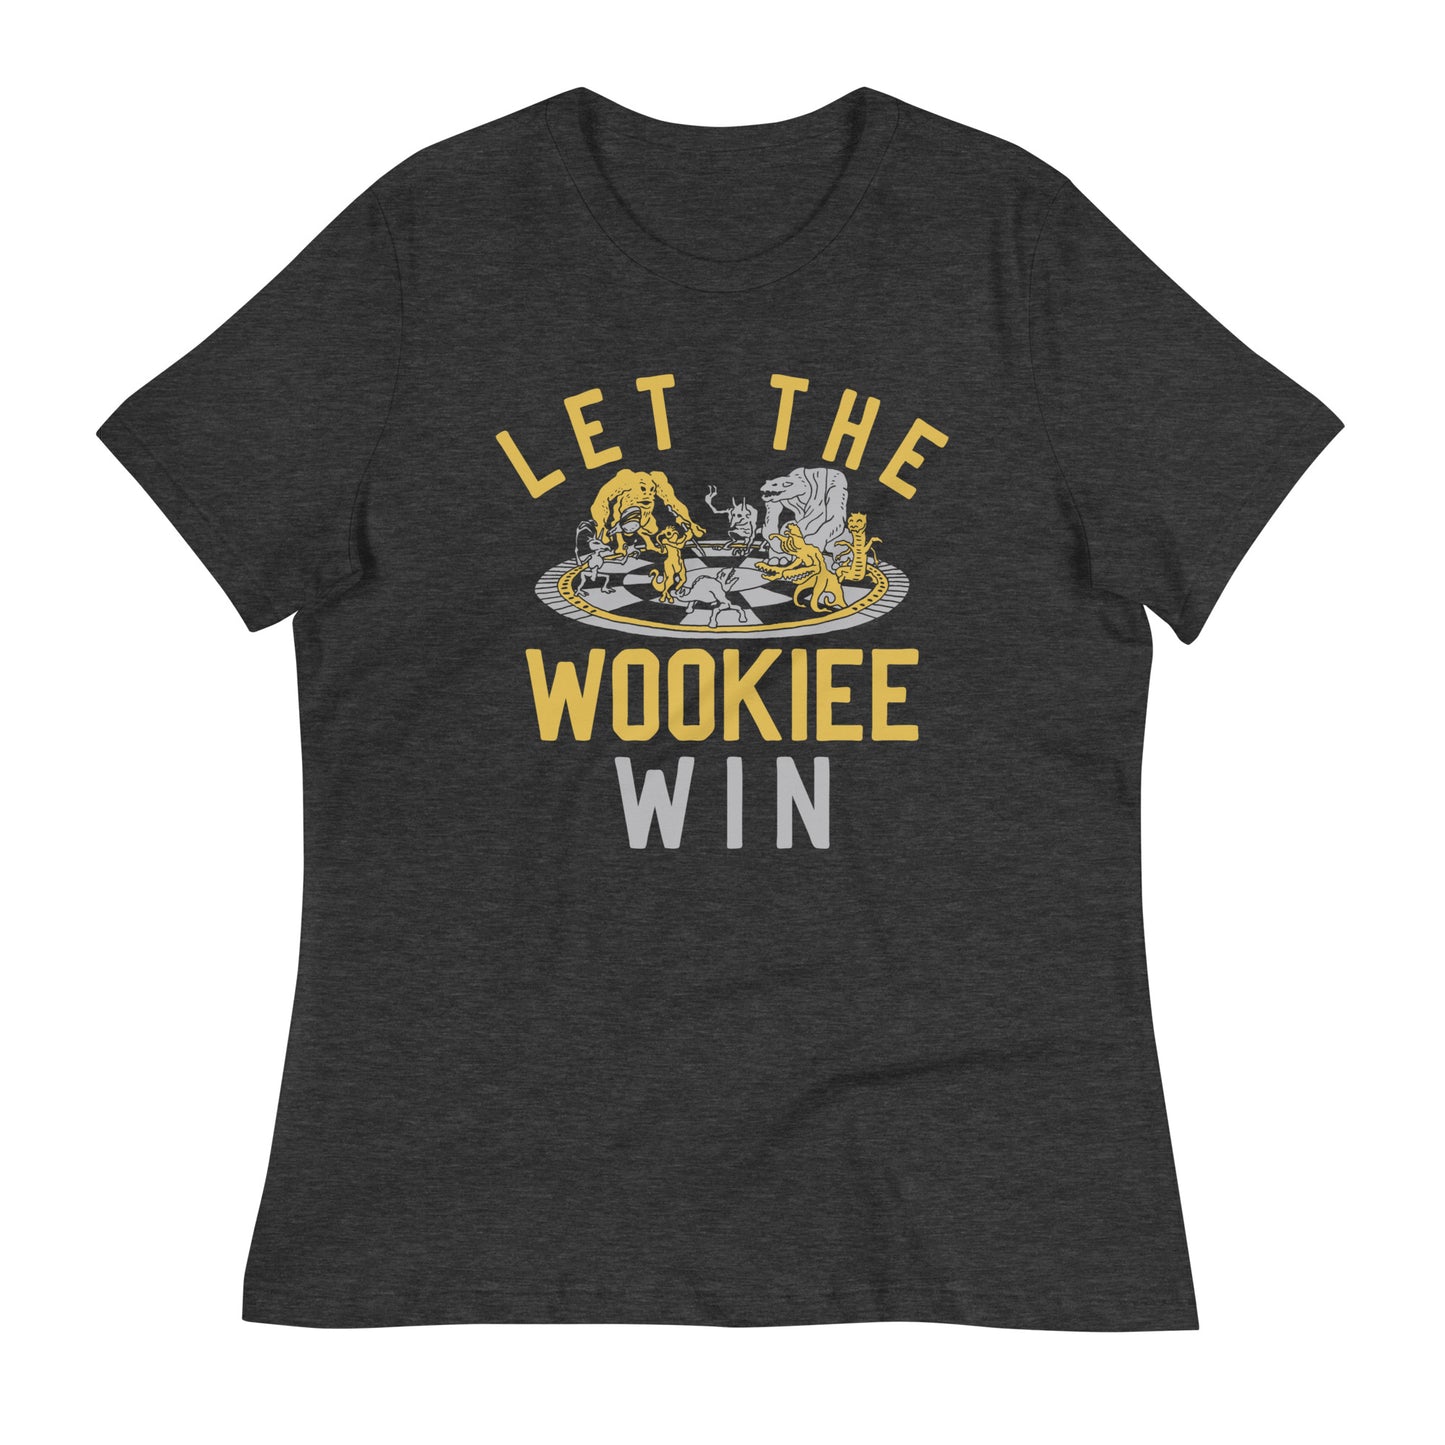 Let The Wookiee Win Women's Signature Tee